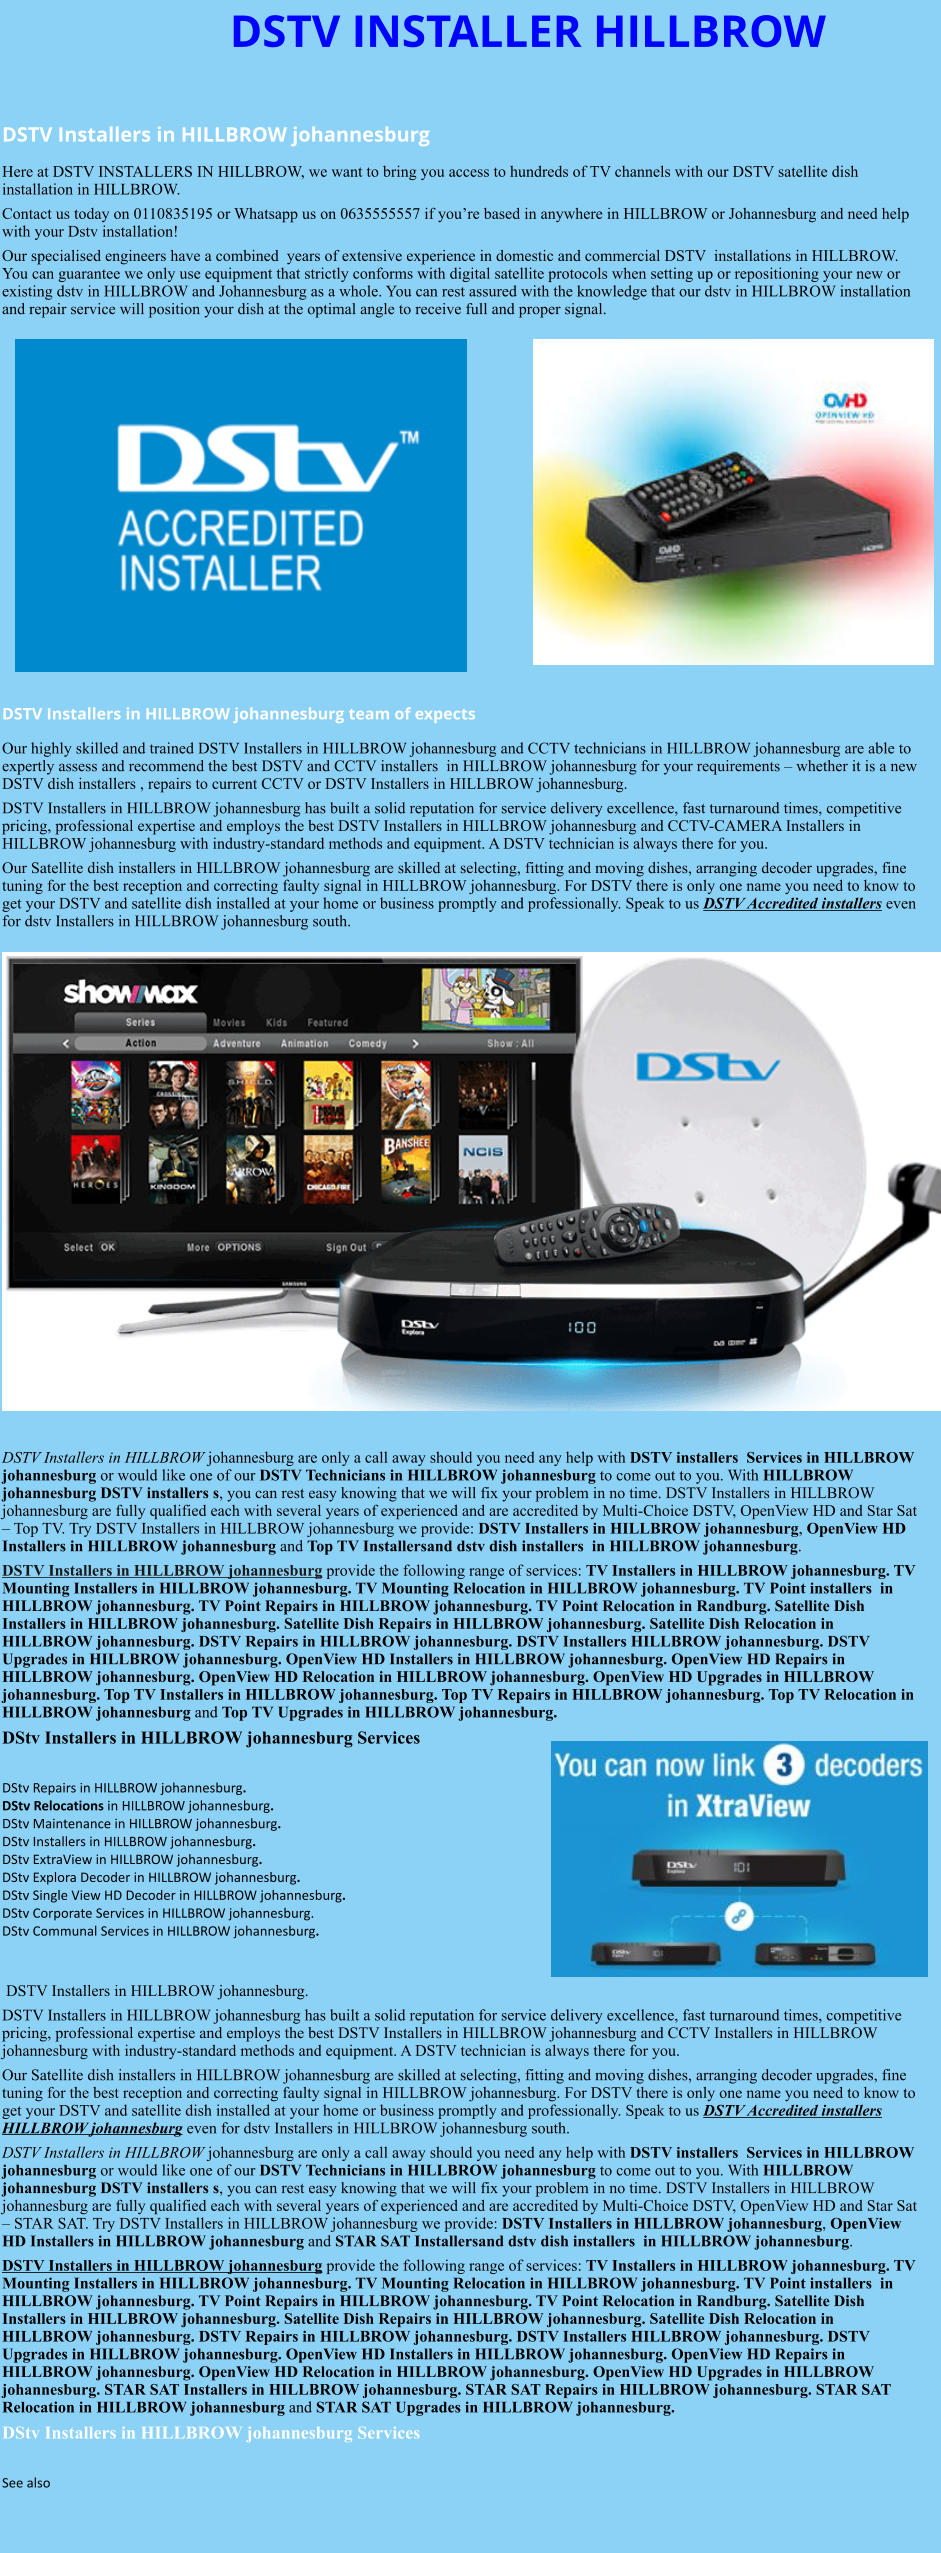 DSTV INSTALLER HILLBROW  DSTV Installers in HILLBROW johannesburg  Here at DSTV INSTALLERS IN HILLBROW, we want to bring you access to hundreds of TV channels with our DSTV satellite dish installation in HILLBROW. Contact us today on 0110835195 or Whatsapp us on 0635555557 if you’re based in anywhere in HILLBROW or Johannesburg and need help with your Dstv installation! Our specialised engineers have a combined  years of extensive experience in domestic and commercial DSTV  installations in HILLBROW. You can guarantee we only use equipment that strictly conforms with digital satellite protocols when setting up or repositioning your new or existing dstv in HILLBROW and Johannesburg as a whole. You can rest assured with the knowledge that our dstv in HILLBROW installation and repair service will position your dish at the optimal angle to receive full and proper signal.                DSTV Installers in HILLBROW johannesburg team of expects Our highly skilled and trained DSTV Installers in HILLBROW johannesburg and CCTV technicians in HILLBROW johannesburg are able to expertly assess and recommend the best DSTV and CCTV installers  in HILLBROW johannesburg for your requirements – whether it is a new DSTV dish installers , repairs to current CCTV or DSTV Installers in HILLBROW johannesburg. DSTV Installers in HILLBROW johannesburg has built a solid reputation for service delivery excellence, fast turnaround times, competitive pricing, professional expertise and employs the best DSTV Installers in HILLBROW johannesburg and CCTV-CAMERA Installers in HILLBROW johannesburg with industry-standard methods and equipment. A DSTV technician is always there for you. Our Satellite dish installers in HILLBROW johannesburg are skilled at selecting, fitting and moving dishes, arranging decoder upgrades, fine tuning for the best reception and correcting faulty signal in HILLBROW johannesburg. For DSTV there is only one name you need to know to get your DSTV and satellite dish installed at your home or business promptly and professionally. Speak to us DSTV Accredited installers even for dstv Installers in HILLBROW johannesburg south.                      DSTV Installers in HILLBROW johannesburg are only a call away should you need any help with DSTV installers  Services in HILLBROW johannesburg or would like one of our DSTV Technicians in HILLBROW johannesburg to come out to you. With HILLBROW johannesburg DSTV installers s, you can rest easy knowing that we will fix your problem in no time. DSTV Installers in HILLBROW johannesburg are fully qualified each with several years of experienced and are accredited by Multi-Choice DSTV, OpenView HD and Star Sat – Top TV. Try DSTV Installers in HILLBROW johannesburg we provide: DSTV Installers in HILLBROW johannesburg, OpenView HD Installers in HILLBROW johannesburg and Top TV Installersand dstv dish installers  in HILLBROW johannesburg. DSTV Installers in HILLBROW johannesburg provide the following range of services: TV Installers in HILLBROW johannesburg. TV Mounting Installers in HILLBROW johannesburg. TV Mounting Relocation in HILLBROW johannesburg. TV Point installers  in HILLBROW johannesburg. TV Point Repairs in HILLBROW johannesburg. TV Point Relocation in Randburg. Satellite Dish Installers in HILLBROW johannesburg. Satellite Dish Repairs in HILLBROW johannesburg. Satellite Dish Relocation in HILLBROW johannesburg. DSTV Repairs in HILLBROW johannesburg. DSTV Installers HILLBROW johannesburg. DSTV Upgrades in HILLBROW johannesburg. OpenView HD Installers in HILLBROW johannesburg. OpenView HD Repairs in HILLBROW johannesburg. OpenView HD Relocation in HILLBROW johannesburg. OpenView HD Upgrades in HILLBROW johannesburg. Top TV Installers in HILLBROW johannesburg. Top TV Repairs in HILLBROW johannesburg. Top TV Relocation in HILLBROW johannesburg and Top TV Upgrades in HILLBROW johannesburg. DStv Installers in HILLBROW johannesburg Services  DStv Repairs in HILLBROW johannesburg.  DStv Relocations in HILLBROW johannesburg.  DStv Maintenance in HILLBROW johannesburg. DStv Installers in HILLBROW johannesburg. DStv ExtraView in HILLBROW johannesburg. DStv Explora Decoder in HILLBROW johannesburg. DStv Single View HD Decoder in HILLBROW johannesburg. DStv Corporate Services in HILLBROW johannesburg. DStv Communal Services in HILLBROW johannesburg.    DSTV Installers in HILLBROW johannesburg. DSTV Installers in HILLBROW johannesburg has built a solid reputation for service delivery excellence, fast turnaround times, competitive pricing, professional expertise and employs the best DSTV Installers in HILLBROW johannesburg and CCTV Installers in HILLBROW johannesburg with industry-standard methods and equipment. A DSTV technician is always there for you. Our Satellite dish installers in HILLBROW johannesburg are skilled at selecting, fitting and moving dishes, arranging decoder upgrades, fine tuning for the best reception and correcting faulty signal in HILLBROW johannesburg. For DSTV there is only one name you need to know to get your DSTV and satellite dish installed at your home or business promptly and professionally. Speak to us DSTV Accredited installers HILLBROW johannesburg even for dstv Installers in HILLBROW johannesburg south. DSTV Installers in HILLBROW johannesburg are only a call away should you need any help with DSTV installers  Services in HILLBROW johannesburg or would like one of our DSTV Technicians in HILLBROW johannesburg to come out to you. With HILLBROW johannesburg DSTV installers s, you can rest easy knowing that we will fix your problem in no time. DSTV Installers in HILLBROW johannesburg are fully qualified each with several years of experienced and are accredited by Multi-Choice DSTV, OpenView HD and Star Sat – STAR SAT. Try DSTV Installers in HILLBROW johannesburg we provide: DSTV Installers in HILLBROW johannesburg, OpenView HD Installers in HILLBROW johannesburg and STAR SAT Installersand dstv dish installers  in HILLBROW johannesburg. DSTV Installers in HILLBROW johannesburg provide the following range of services: TV Installers in HILLBROW johannesburg. TV Mounting Installers in HILLBROW johannesburg. TV Mounting Relocation in HILLBROW johannesburg. TV Point installers  in HILLBROW johannesburg. TV Point Repairs in HILLBROW johannesburg. TV Point Relocation in Randburg. Satellite Dish Installers in HILLBROW johannesburg. Satellite Dish Repairs in HILLBROW johannesburg. Satellite Dish Relocation in HILLBROW johannesburg. DSTV Repairs in HILLBROW johannesburg. DSTV Installers HILLBROW johannesburg. DSTV Upgrades in HILLBROW johannesburg. OpenView HD Installers in HILLBROW johannesburg. OpenView HD Repairs in HILLBROW johannesburg. OpenView HD Relocation in HILLBROW johannesburg. OpenView HD Upgrades in HILLBROW johannesburg. STAR SAT Installers in HILLBROW johannesburg. STAR SAT Repairs in HILLBROW johannesburg. STAR SAT Relocation in HILLBROW johannesburg and STAR SAT Upgrades in HILLBROW johannesburg. DStv Installers in HILLBROW johannesburg Services  See also